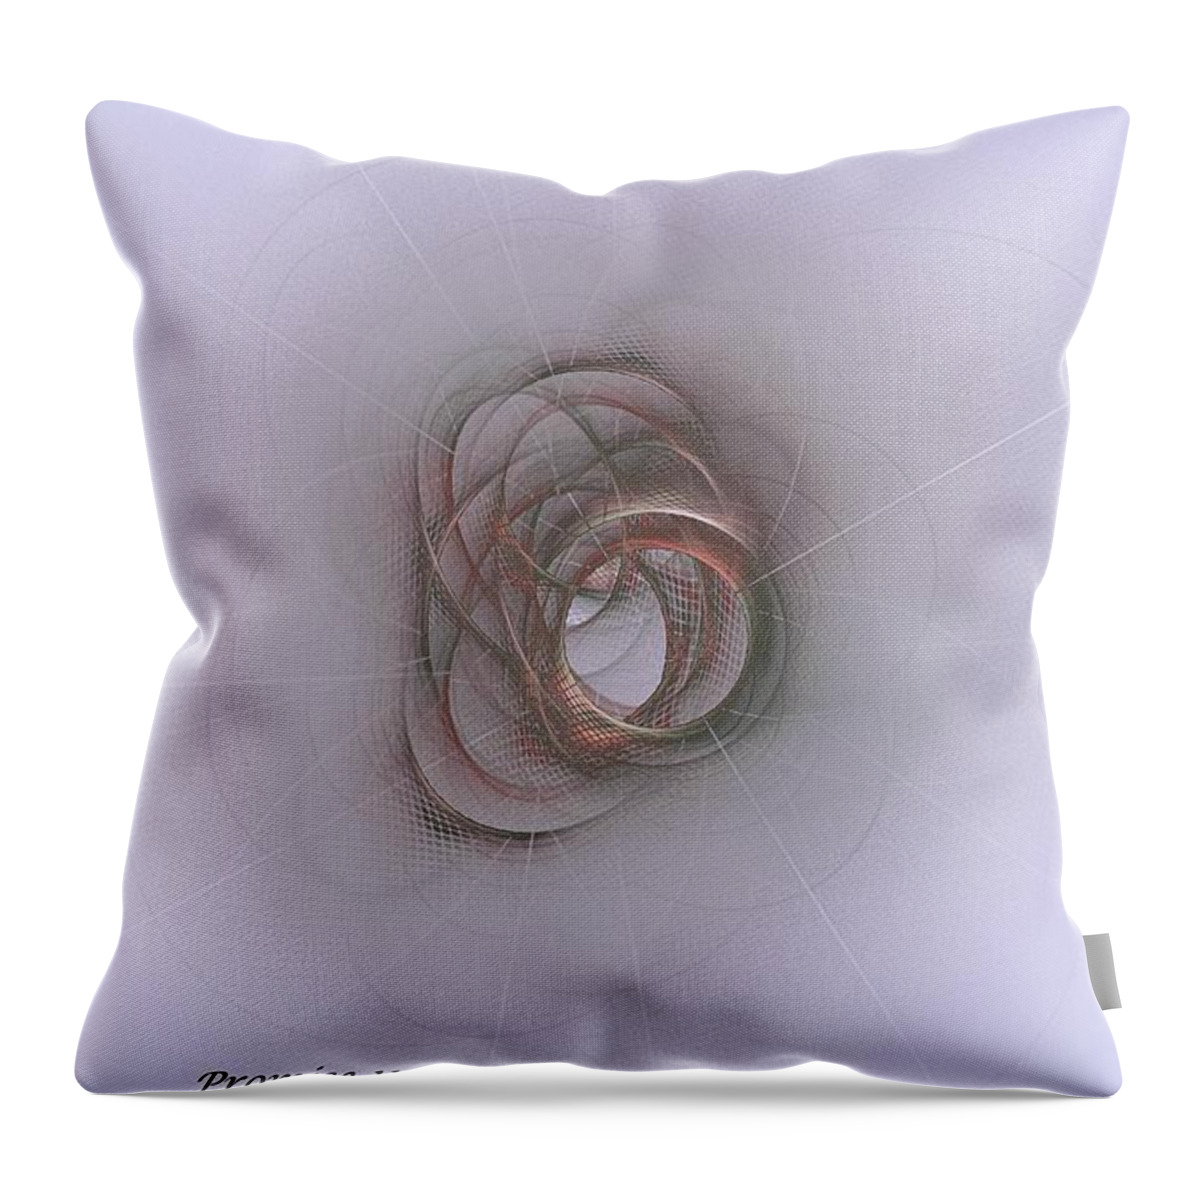 Fractal Art Throw Pillow featuring the digital art Promise 11 Intuition Helps Us by Doug Morgan